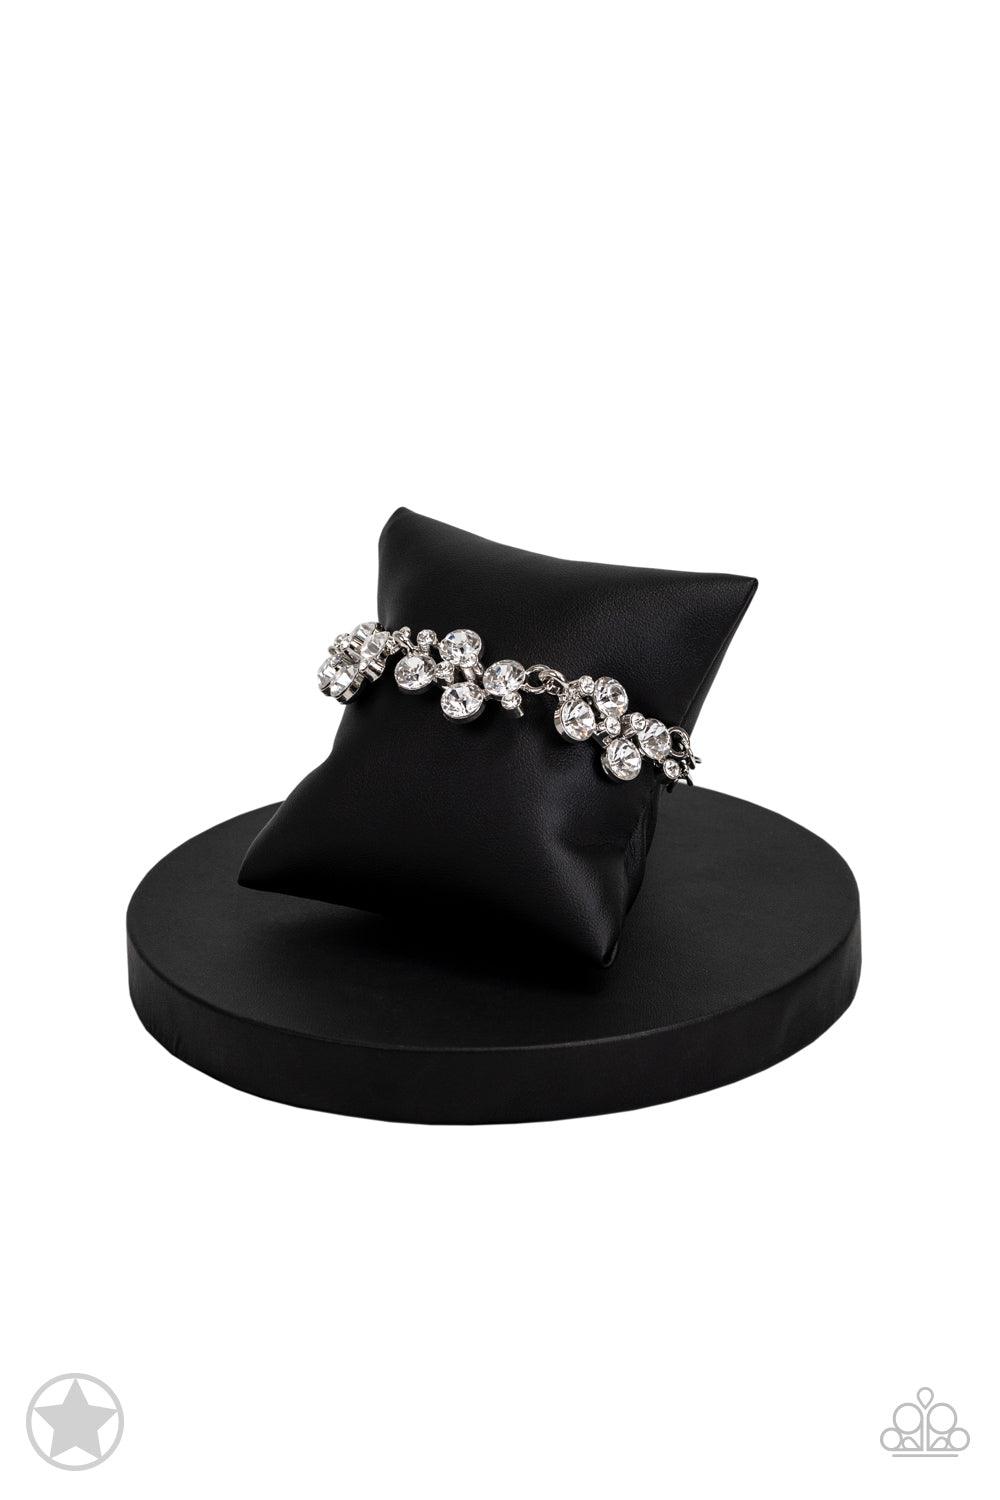 Paparazzi Accessories Old Hollywood Clusters of brilliant white rhinestones drape elegantly along the wrist. The scattered pattern and varying sizes of the rhinestones add breathtaking detail to the piece. Features an adjustable clasp closure. Sold as one